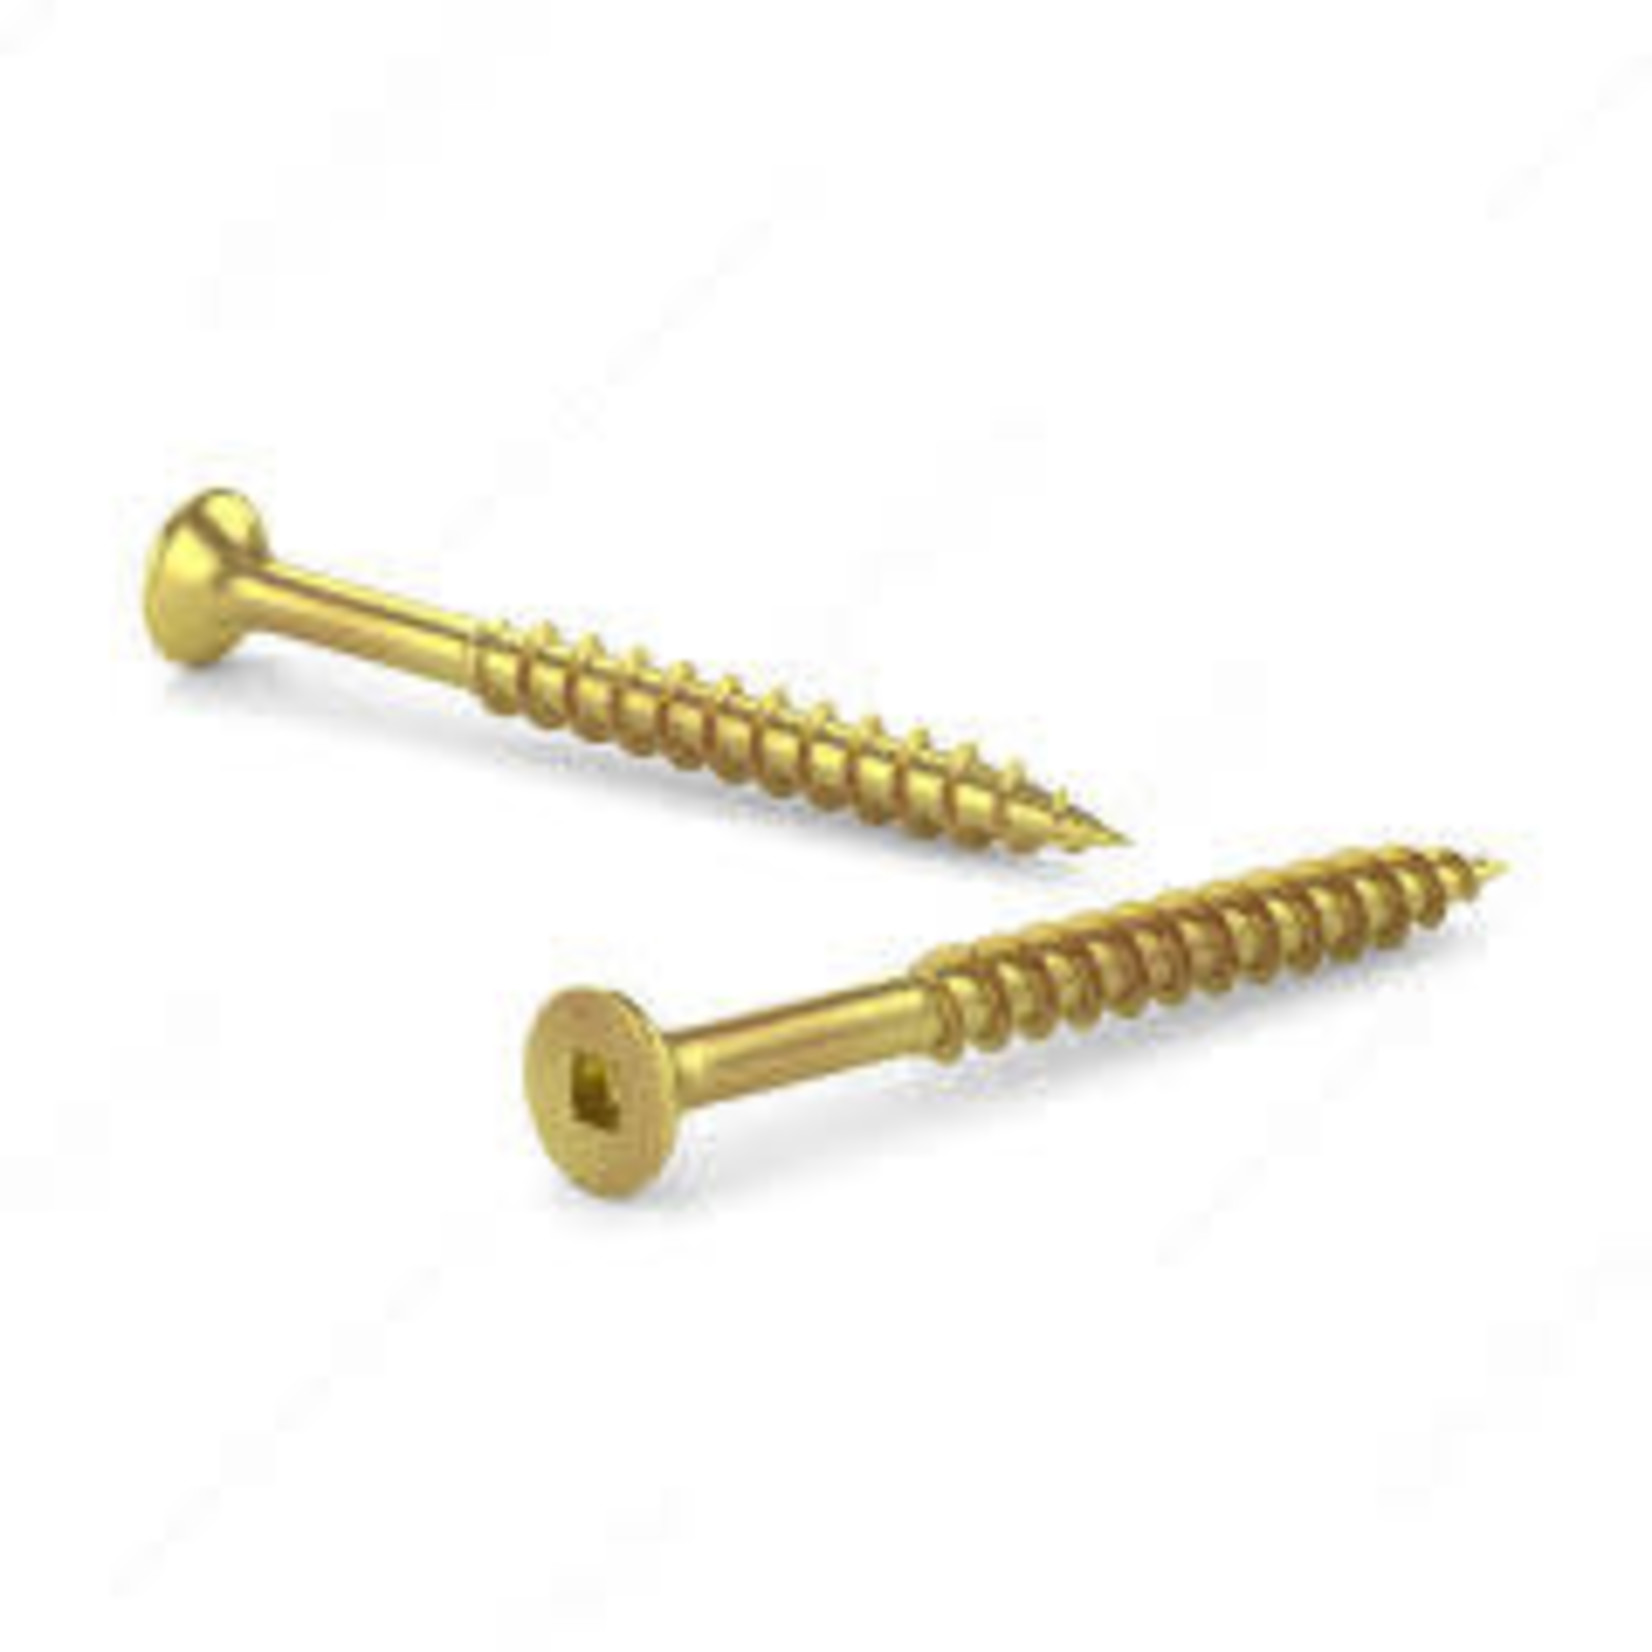 RELIABLE ALL PURPOSE YELLOW ZINC SCREW, #10 X 3-1/2IN, 1500PK